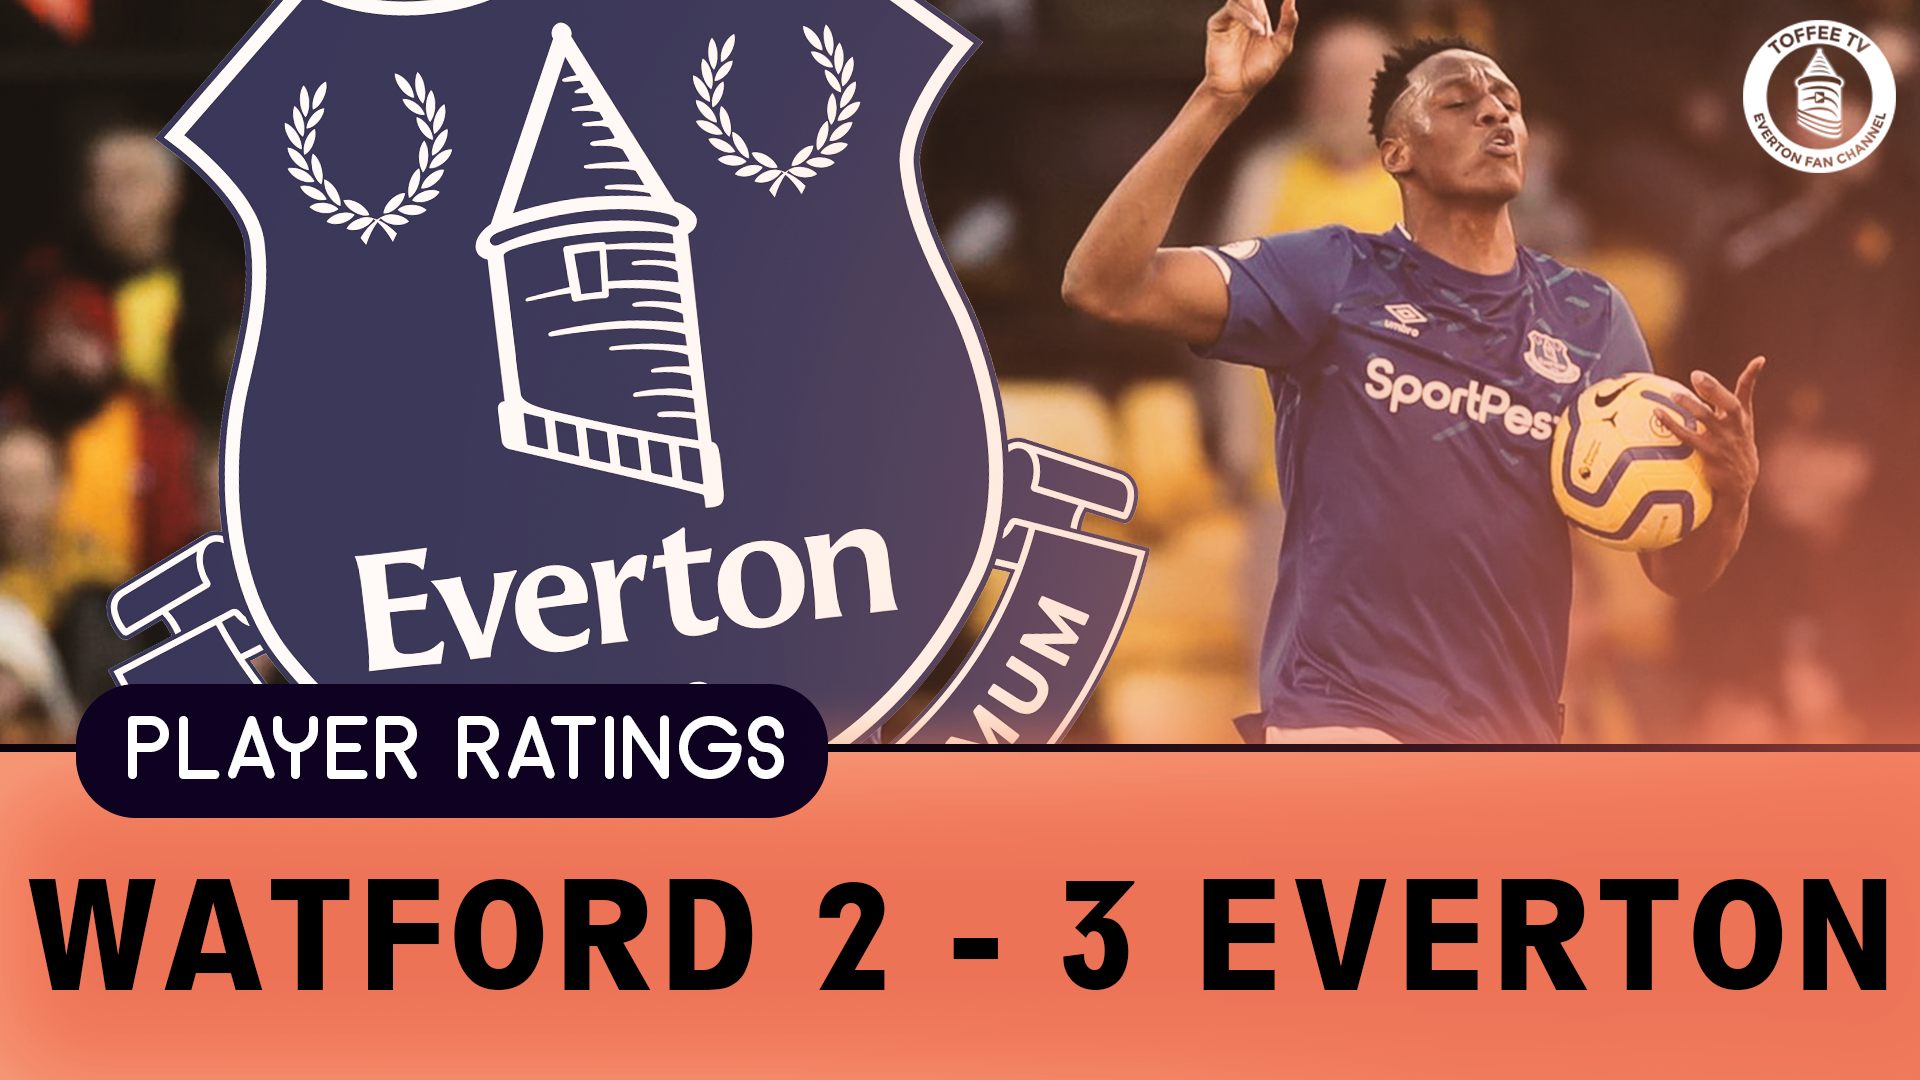 Featured image for “VIDEO: Watford 2-3 Everton | Player Ratings”